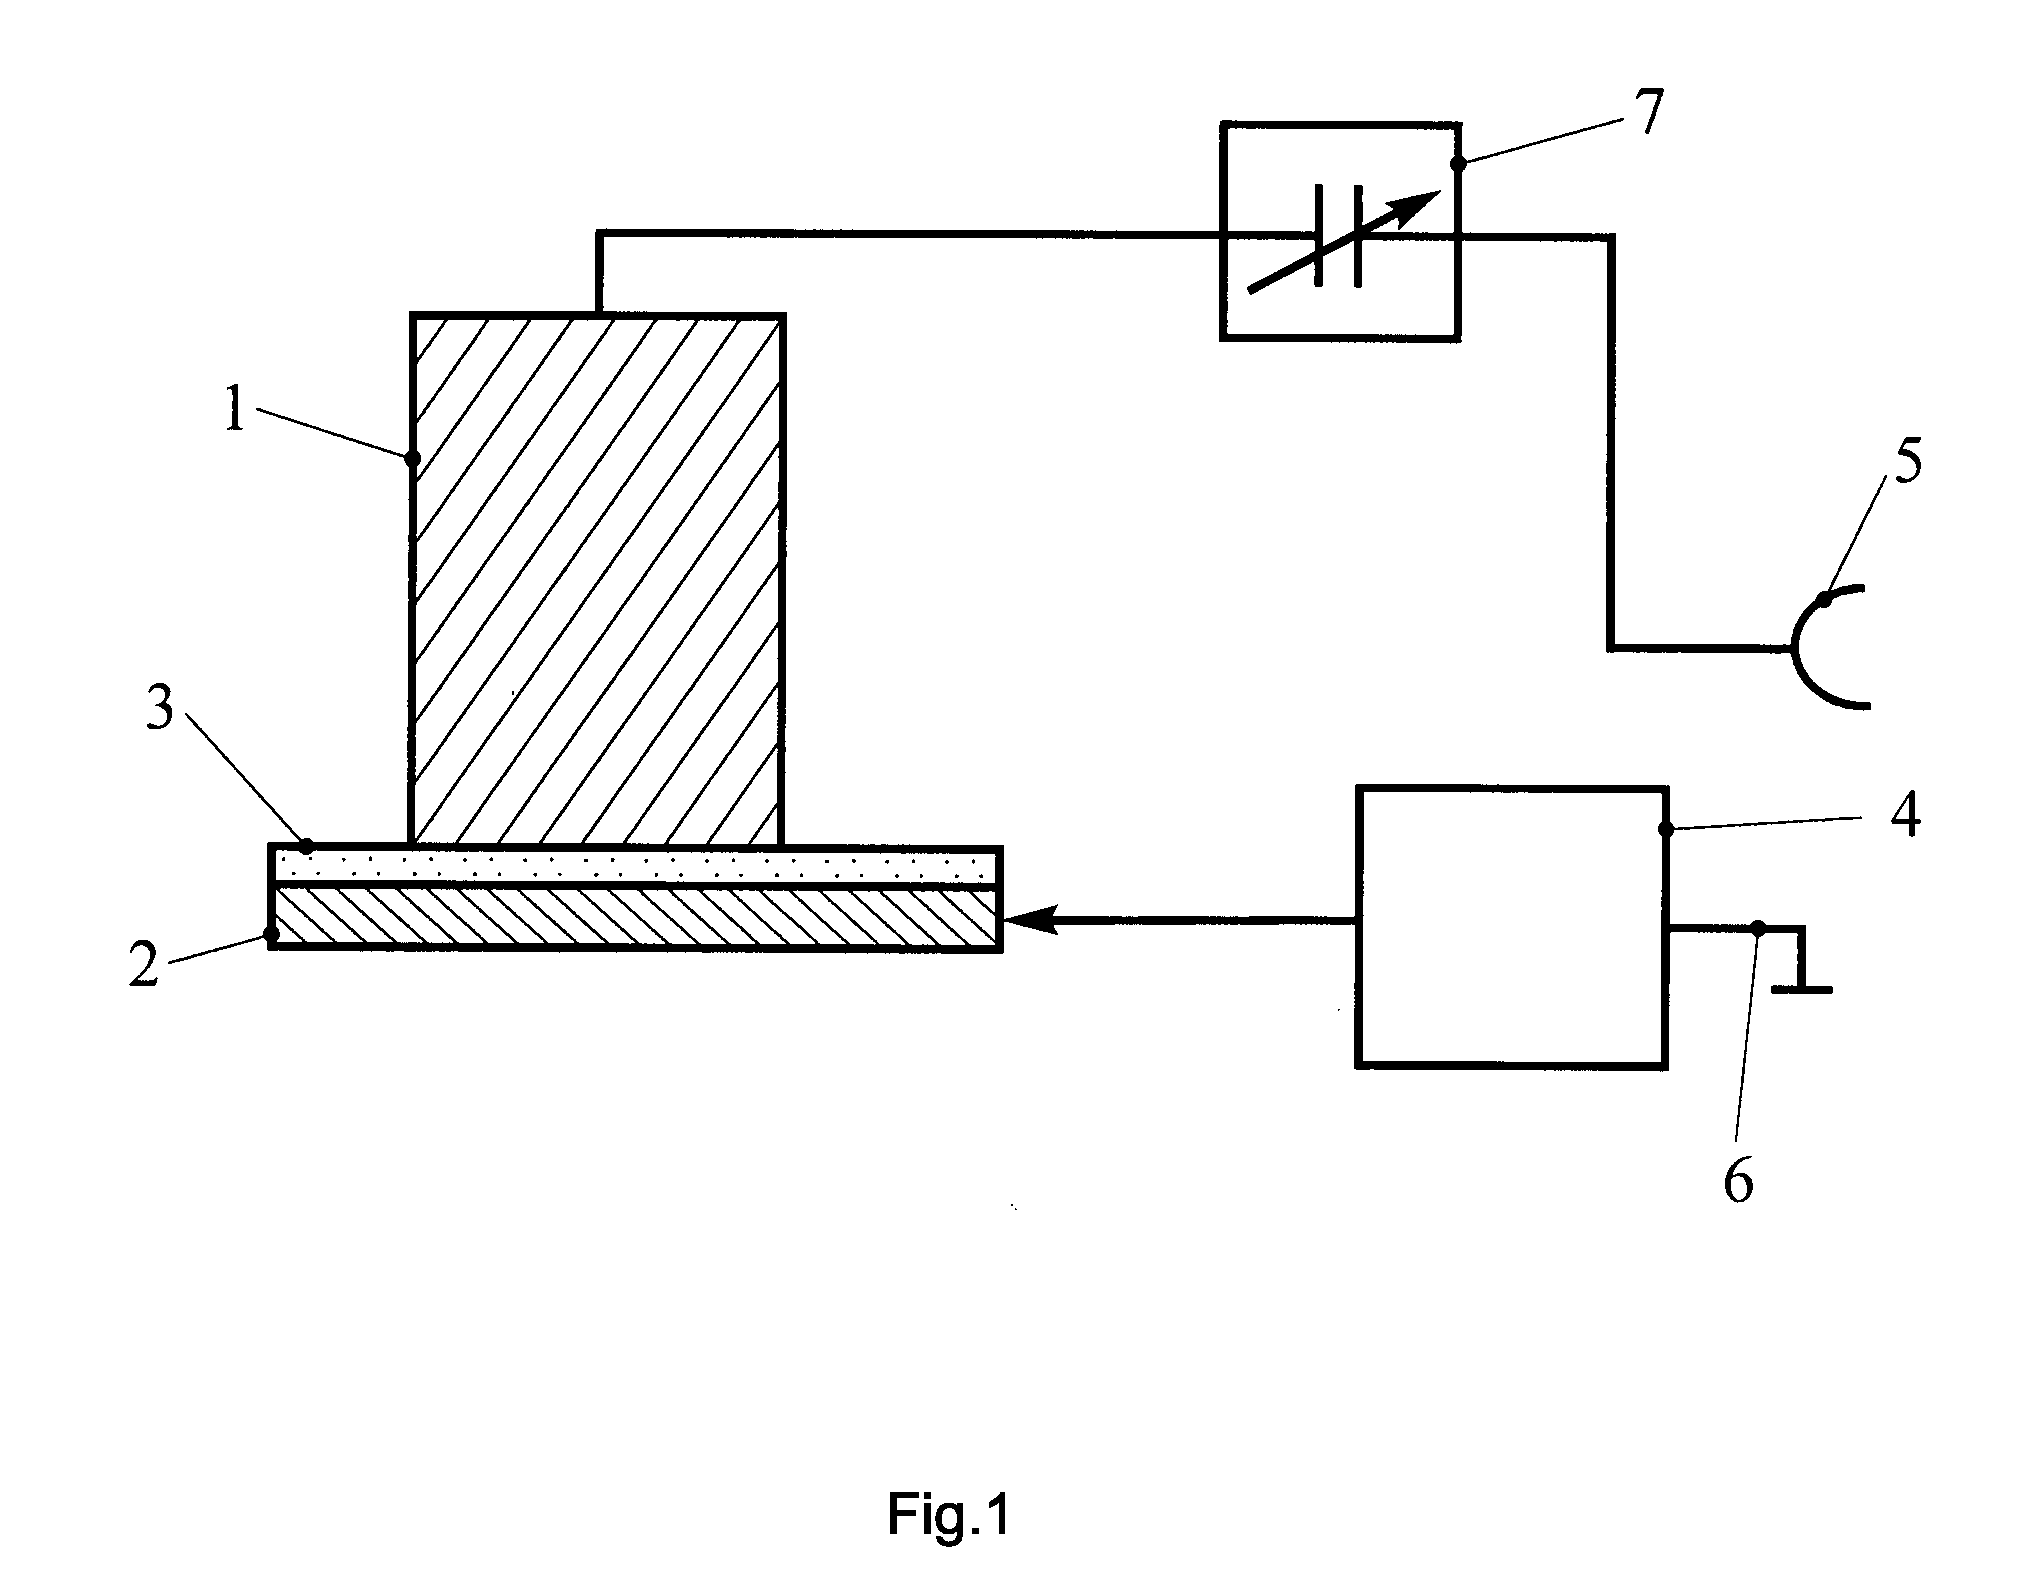 Device for measuring electromagnetic field intensity